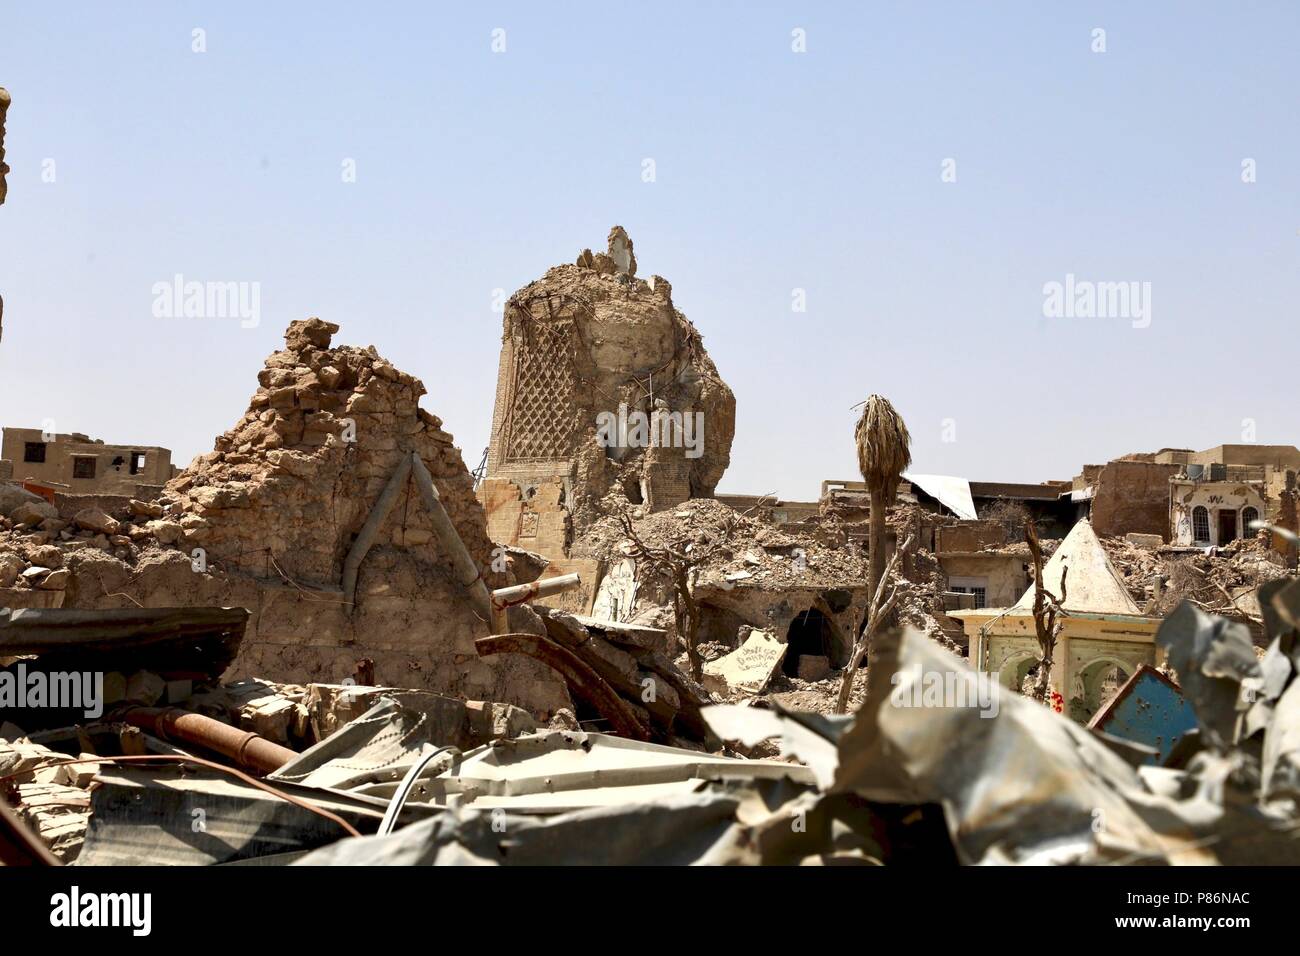 Mosul. 5th July, 2018. Photo taken on July 5, 2018 shows the destroyed leaning minaret of al-Nuri mosuqe in the old city of Mosul, Iraq. One year after the Iraqi forces liberated the city of Mosul from Islamic State (IS) militants, tens of thousands of displaced residents are still living in tents, suffering the scorching summer with a temperature of over 50 degrees Celsius. TO GO WITH Feature: One year on, tens of thousands of Iraqis remain displaced from homes in Mosul Credit: Khalil Dawood/Xinhua/Alamy Live News Stock Photo